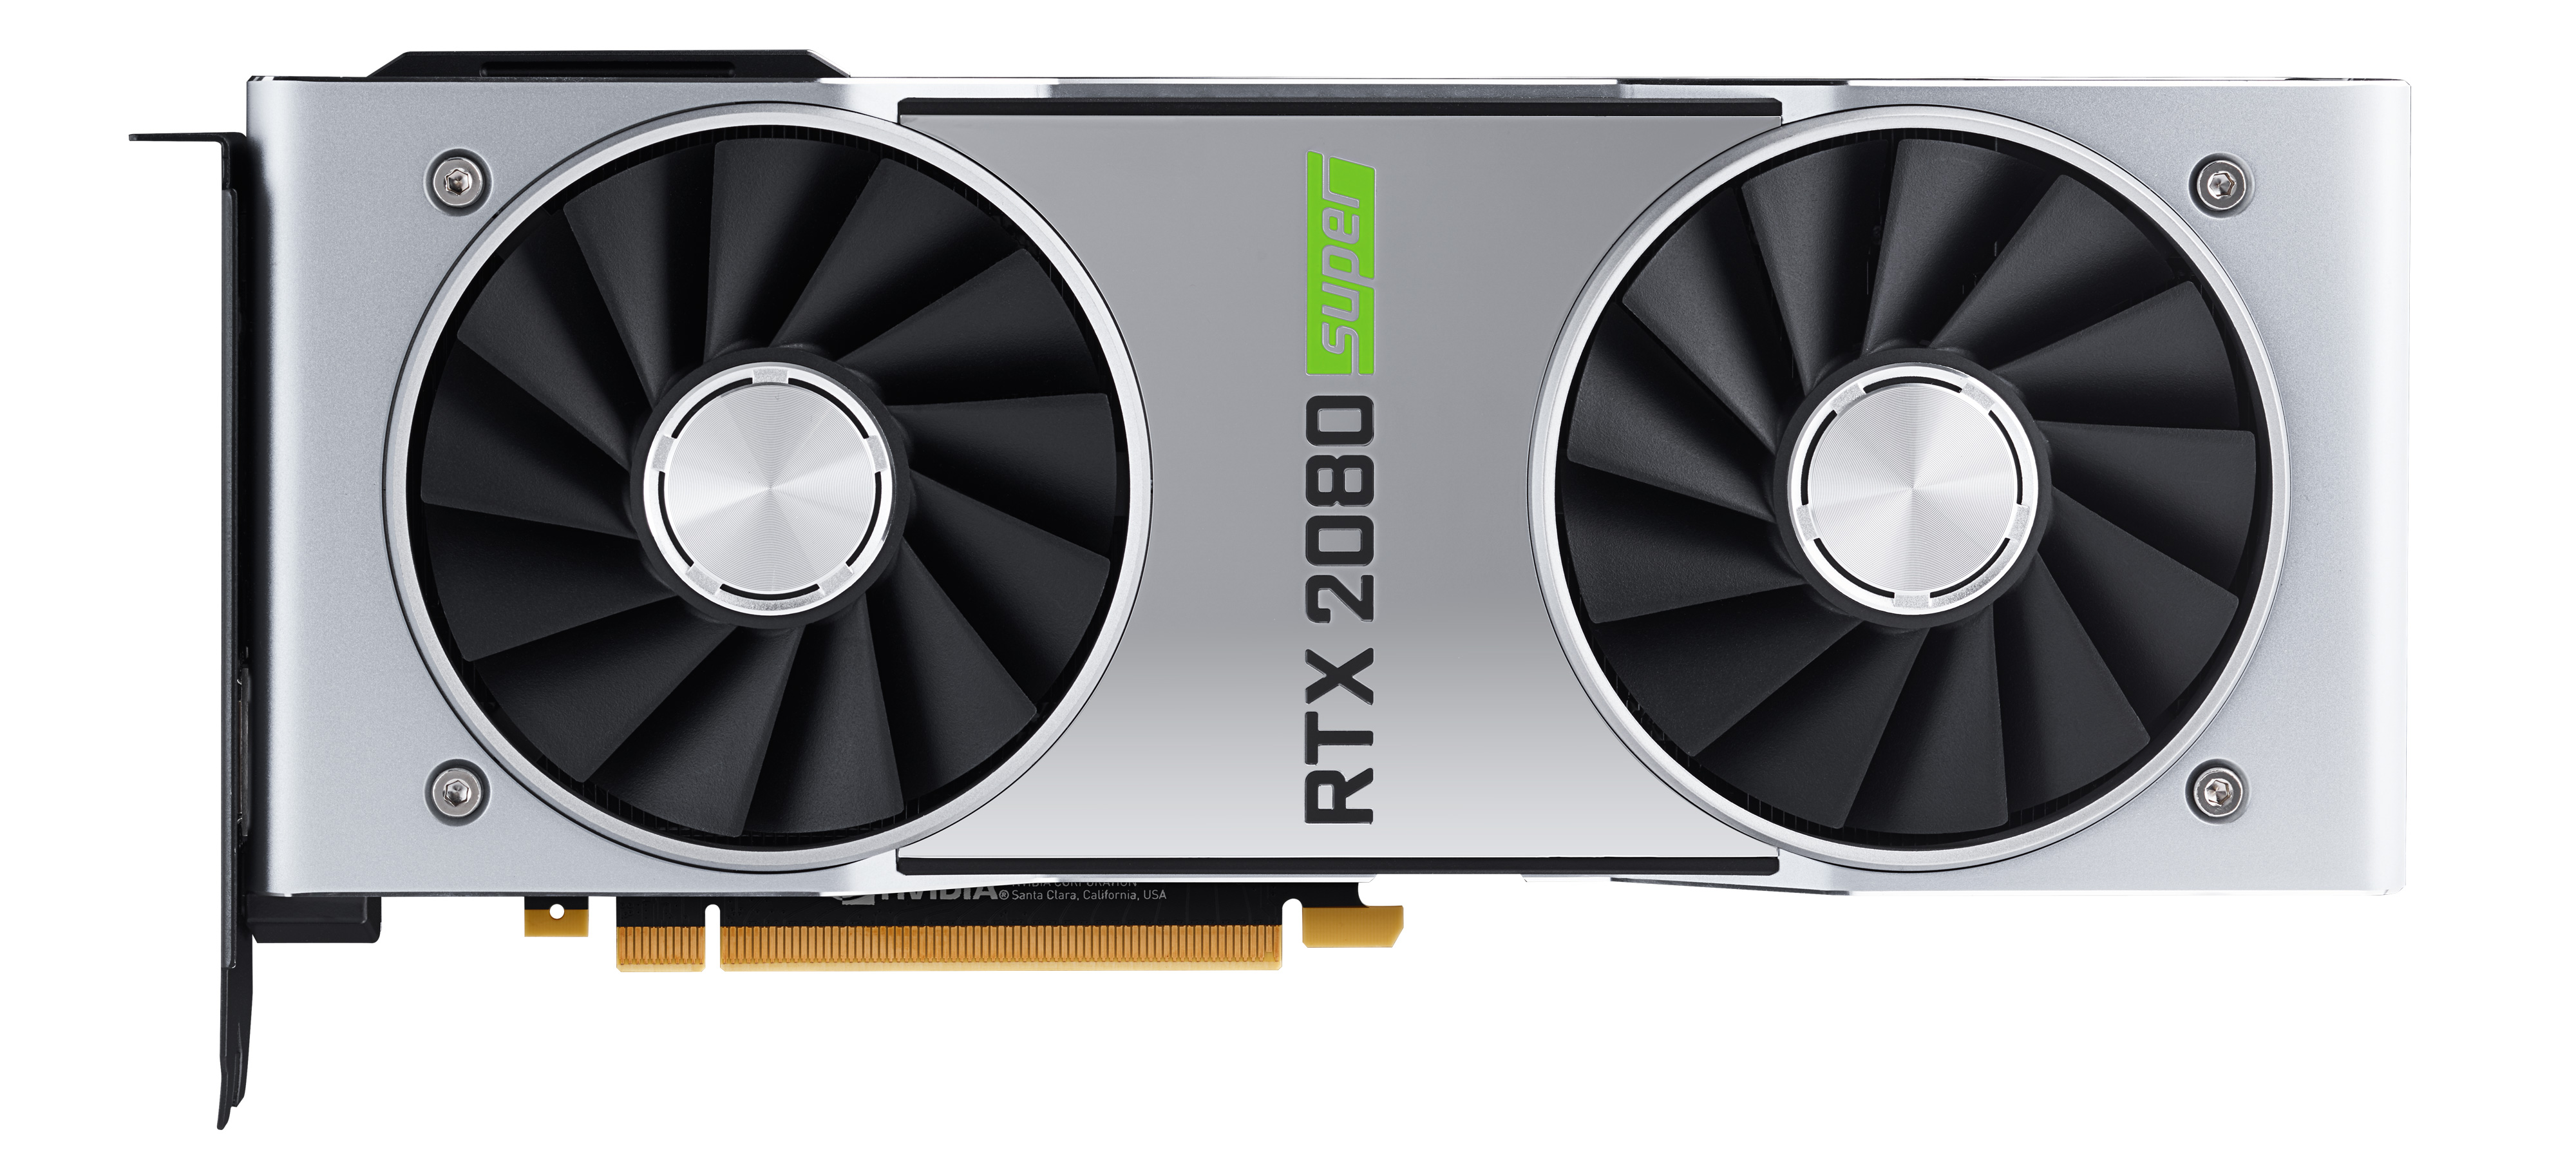 The NVIDIA GeForce RTX 2070 Super RTX 2060 Super Review: Smaller Performance